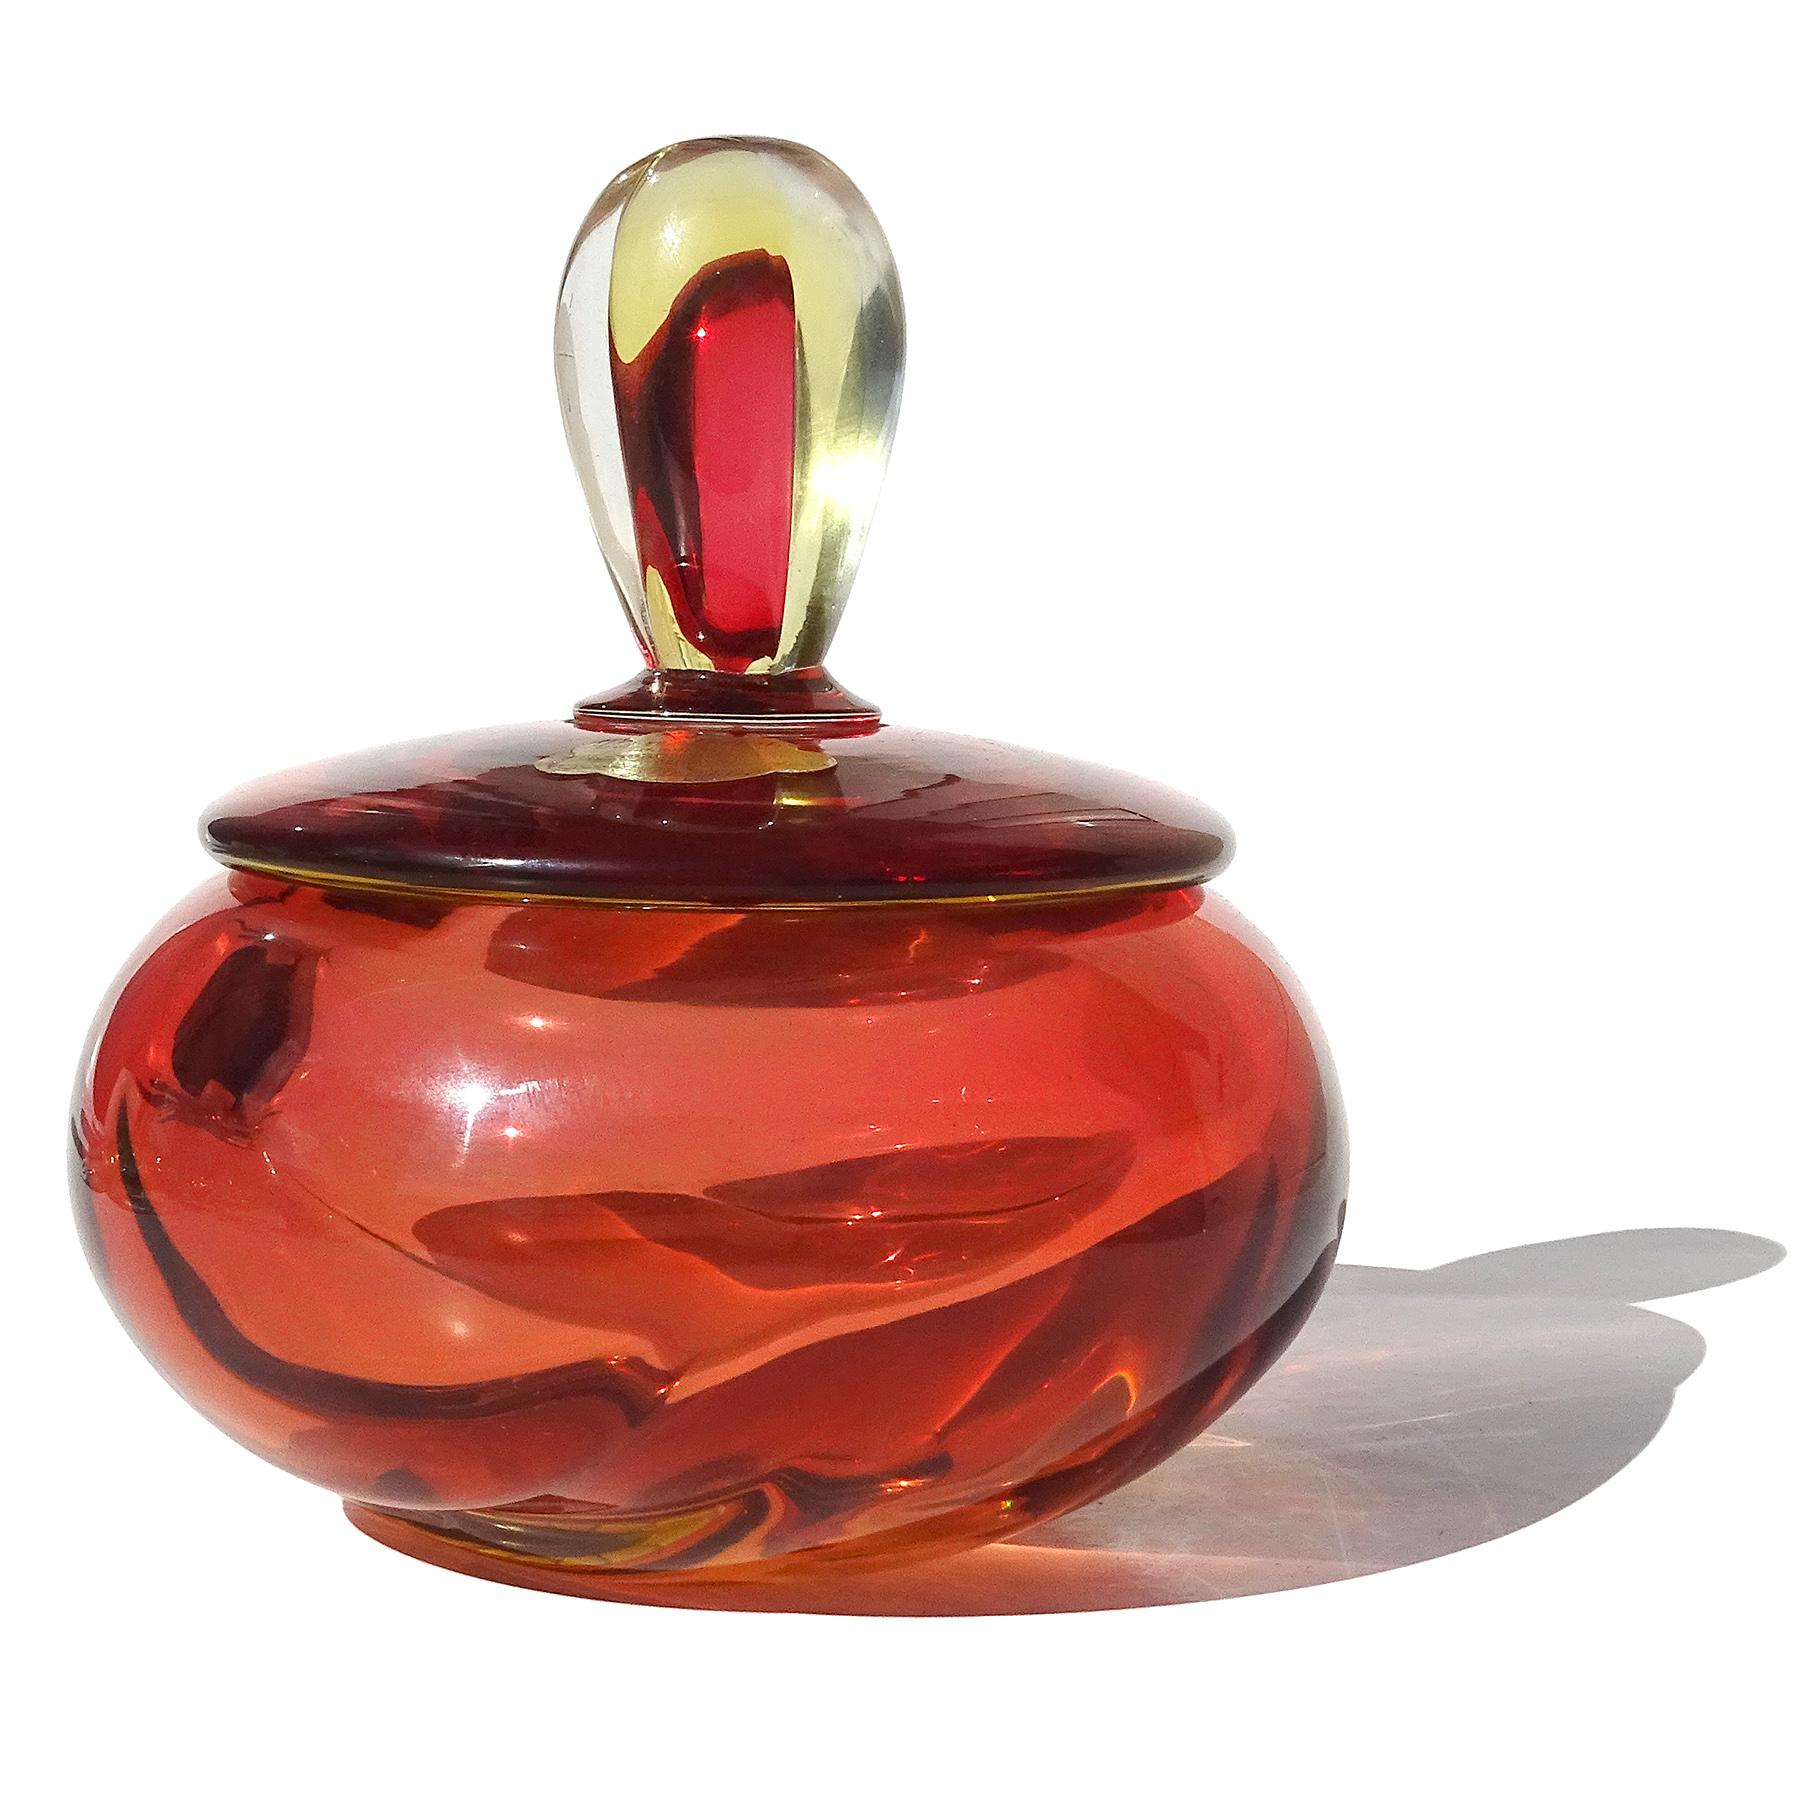 Beautiful vintage Murano hand blown Sommerso red orange, yellow and clear Italian art glass powder / jewelry box. Documented to designer Alfredo Barbini, circa 1950s. It is published in the Barbini catalog. The lid still has the original 